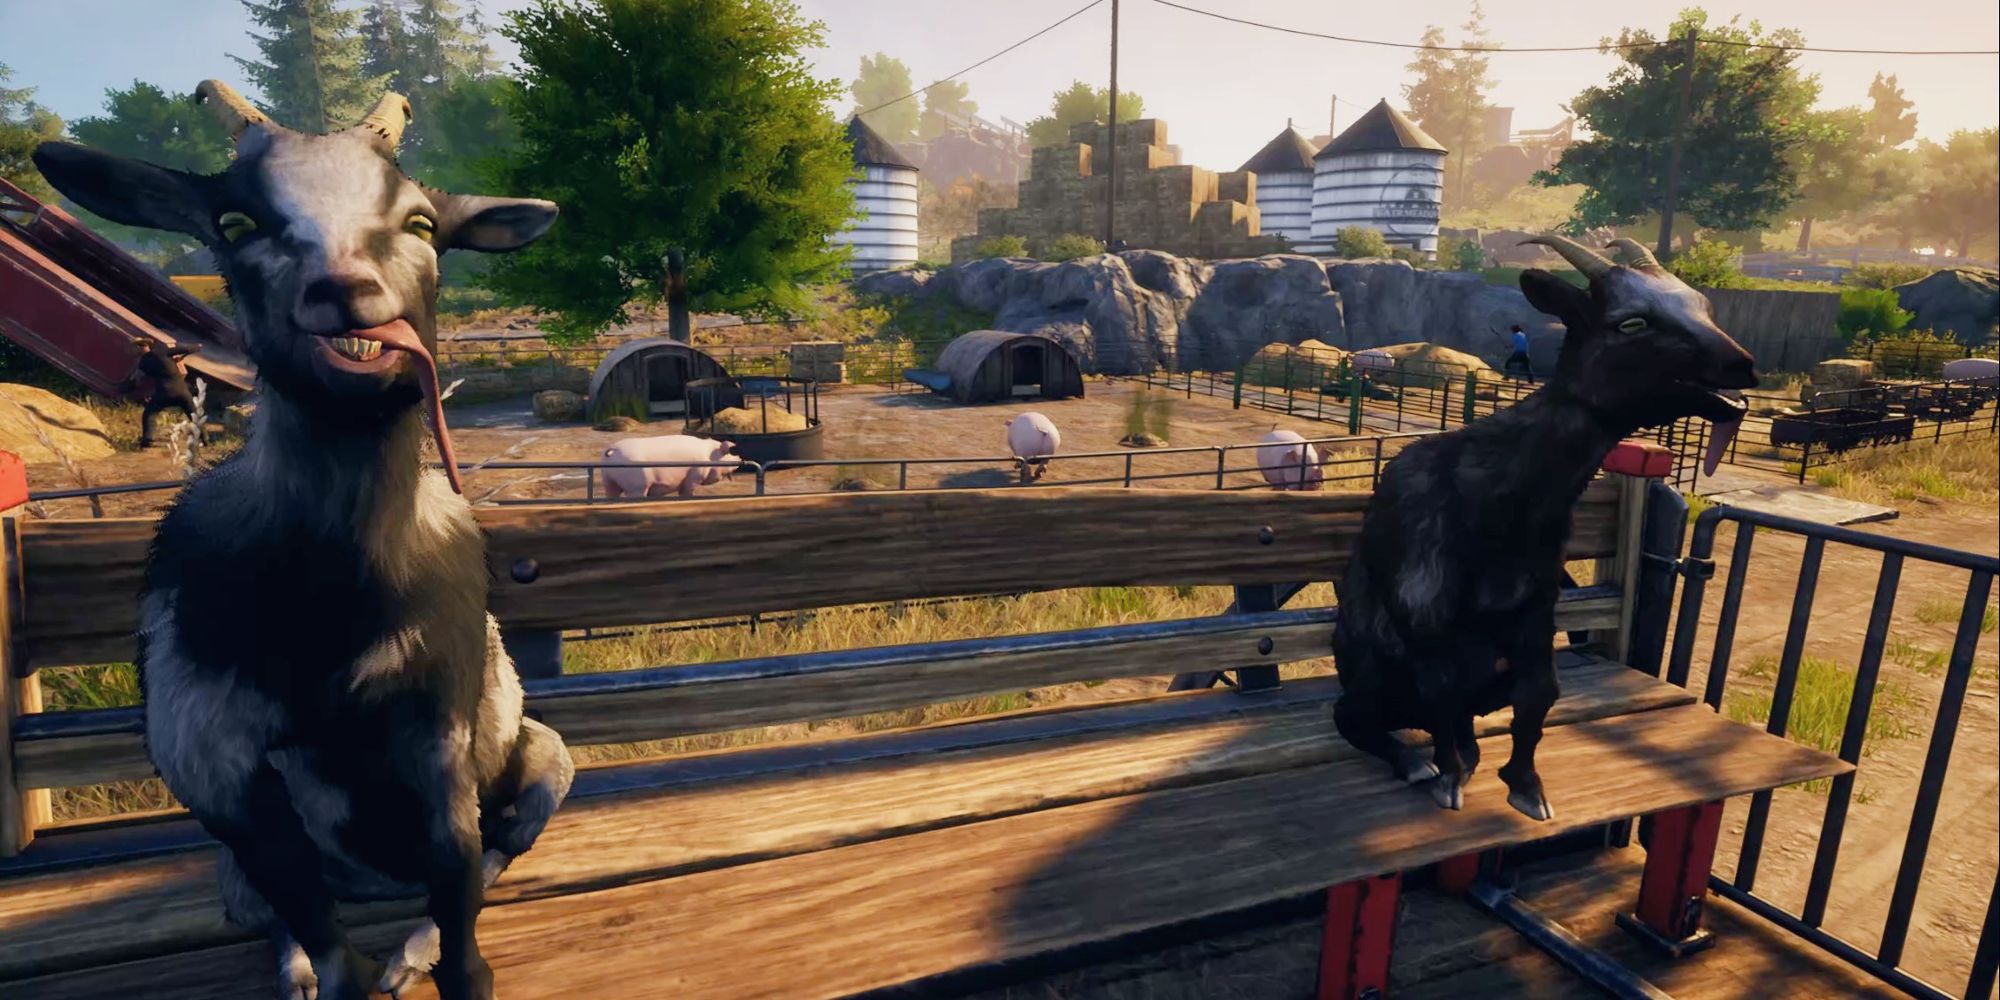 Two goats from Goat Simulator 3 sitting in a cart, in parody of Skyrim's intro.